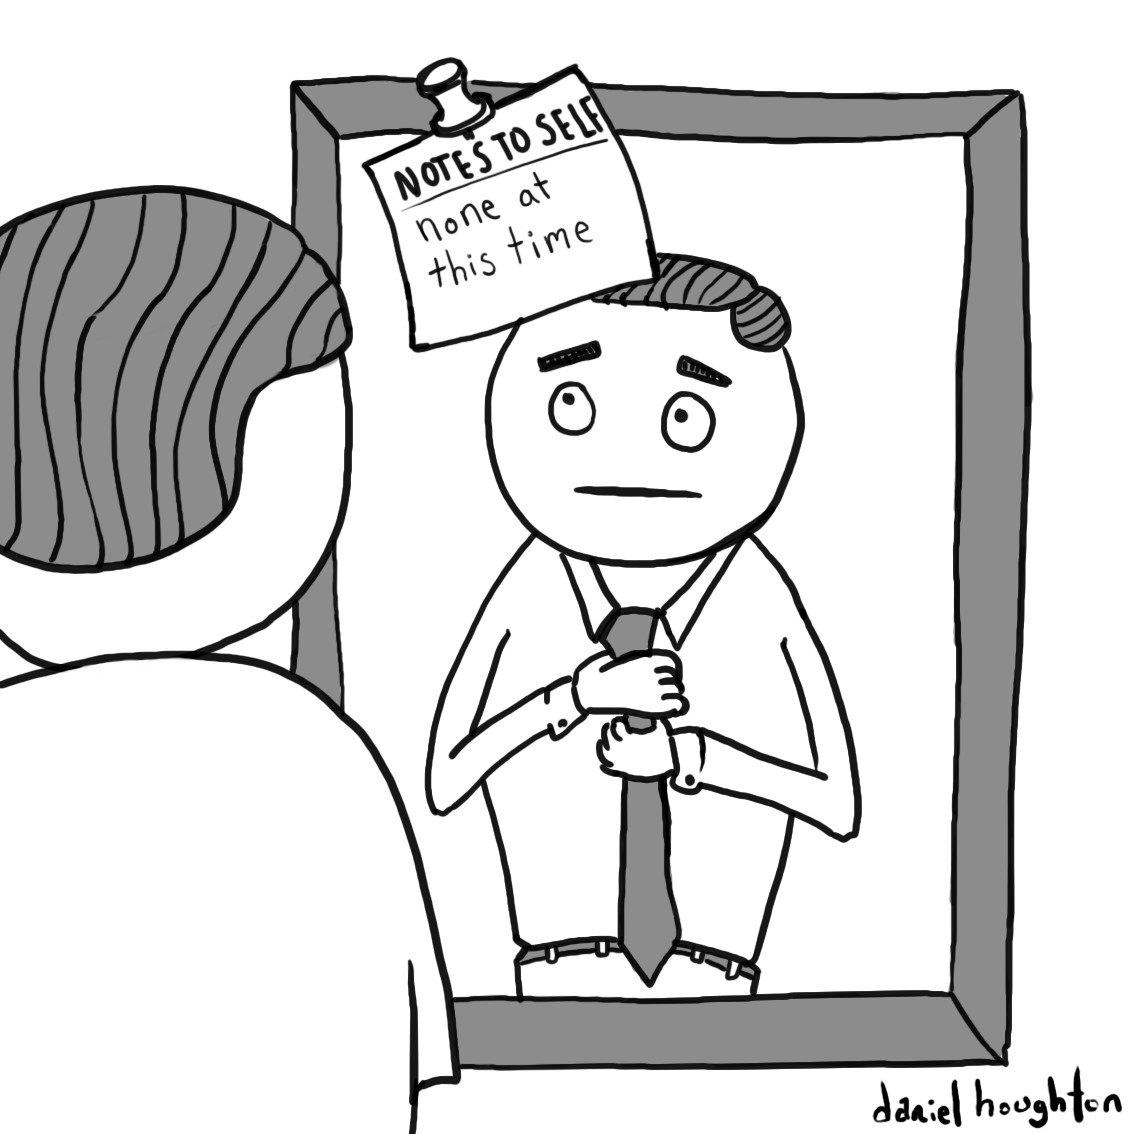 Cartoon of a man looking in a mirror while tying a tie, with a note pinned to the mirror that reads "Notes To Self. None At This Time"